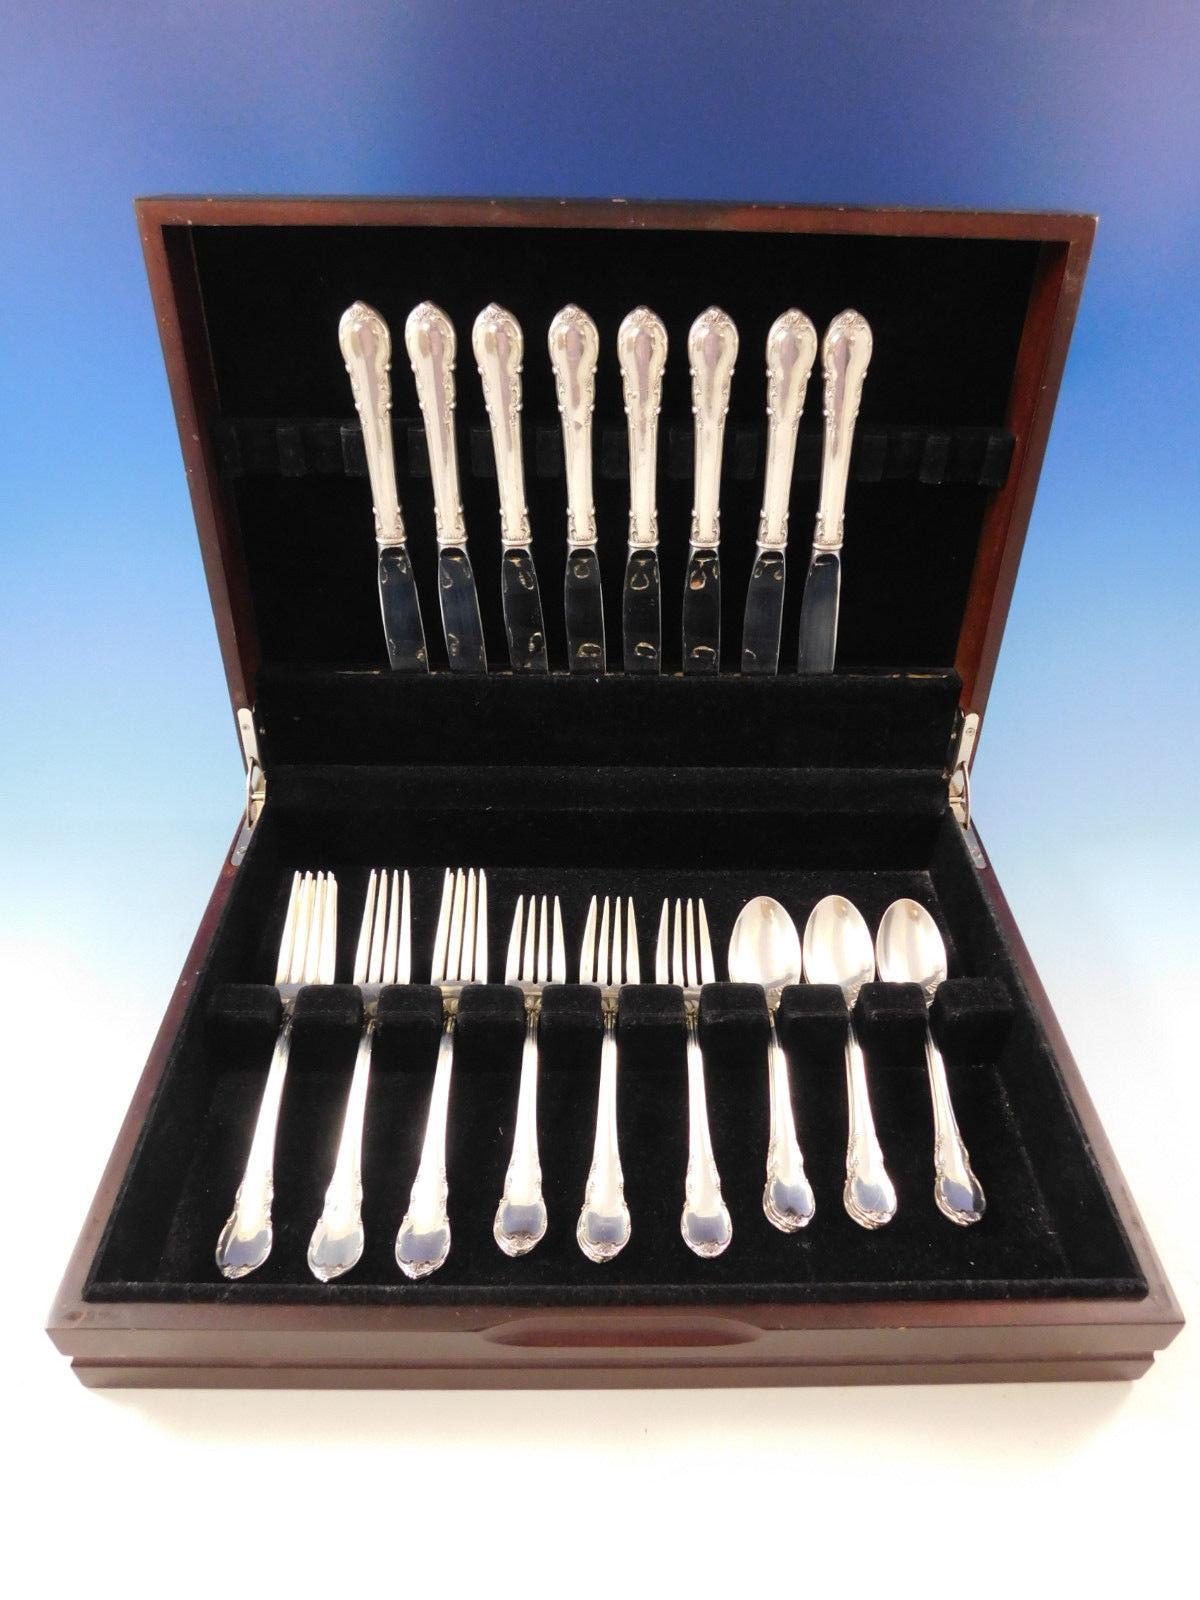 Lovely Modern Victorian by Lunt sterling silver flatware set, 32 pieces. This set includes:

Eight knives, 9